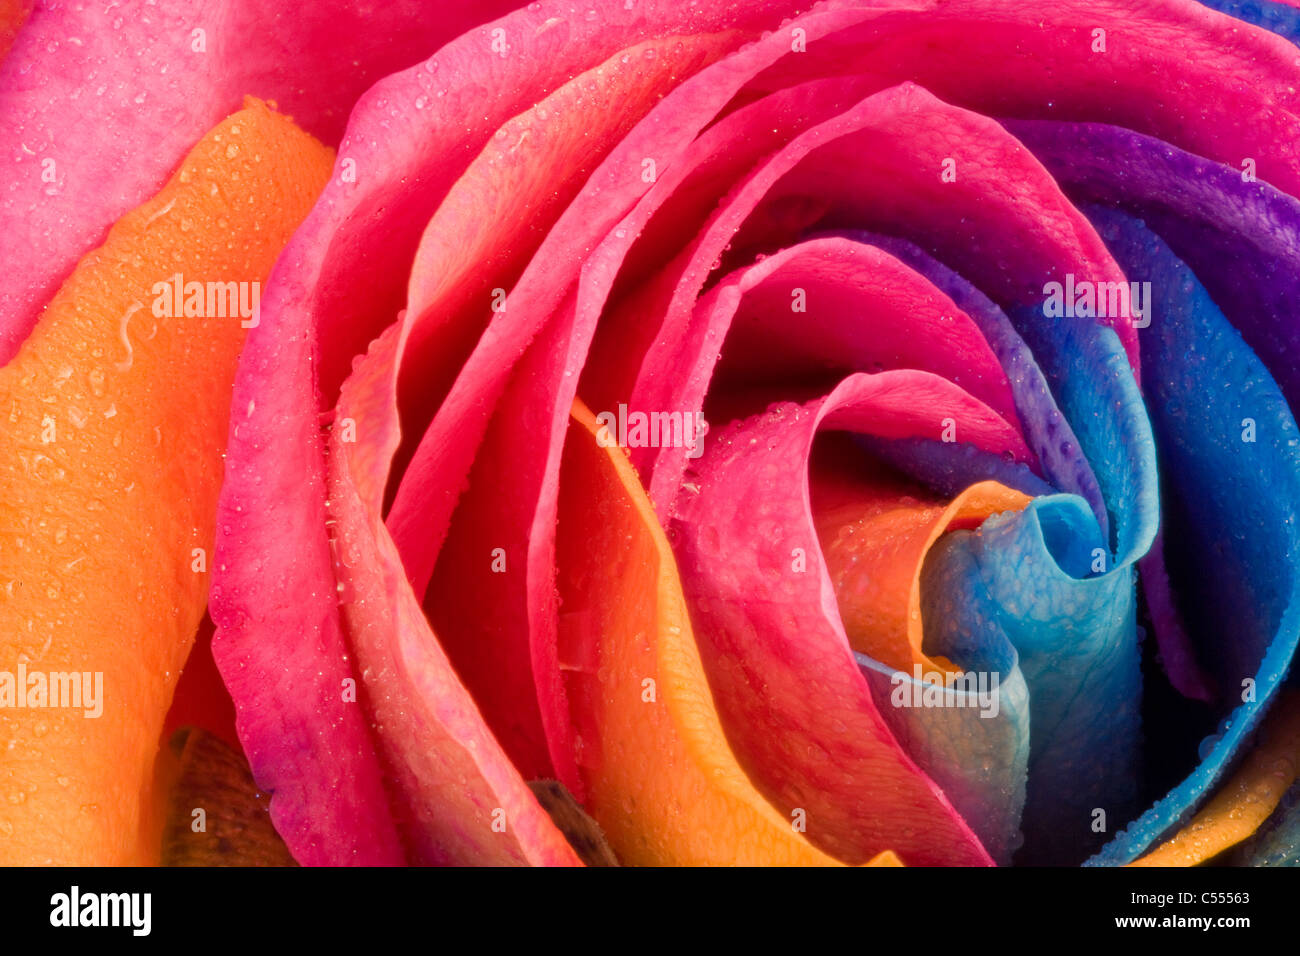 pretty pictures of rainbow flowers